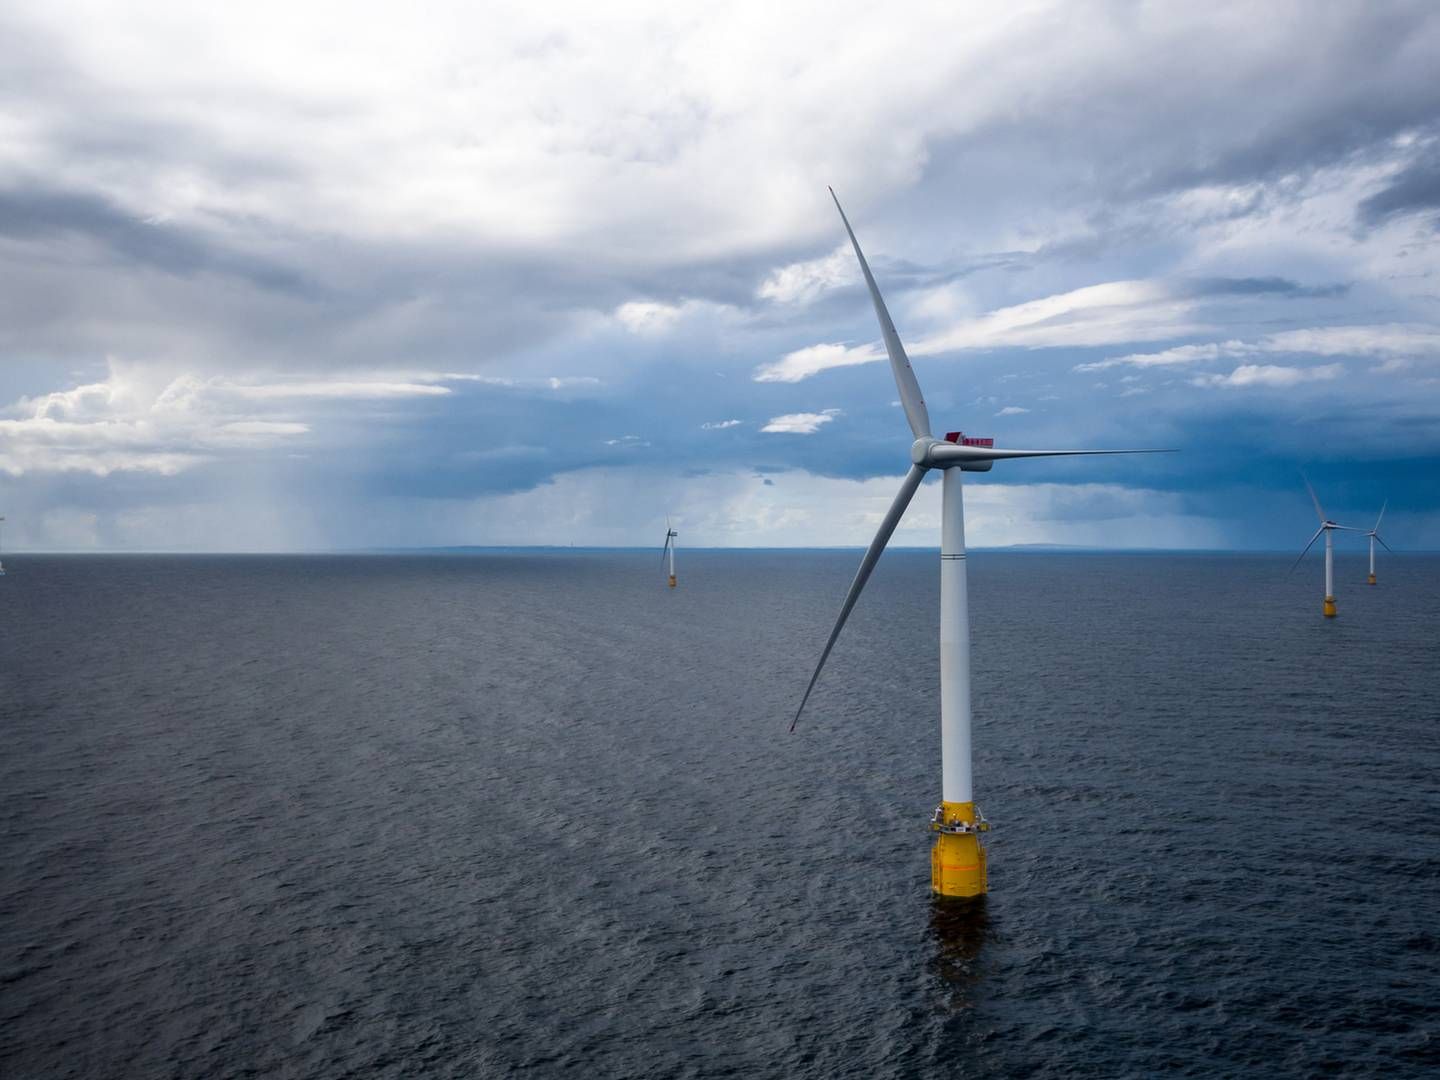 Floating wind farm Hywind Tampen in Norway will be ready in 2020. | Photo: Equinor